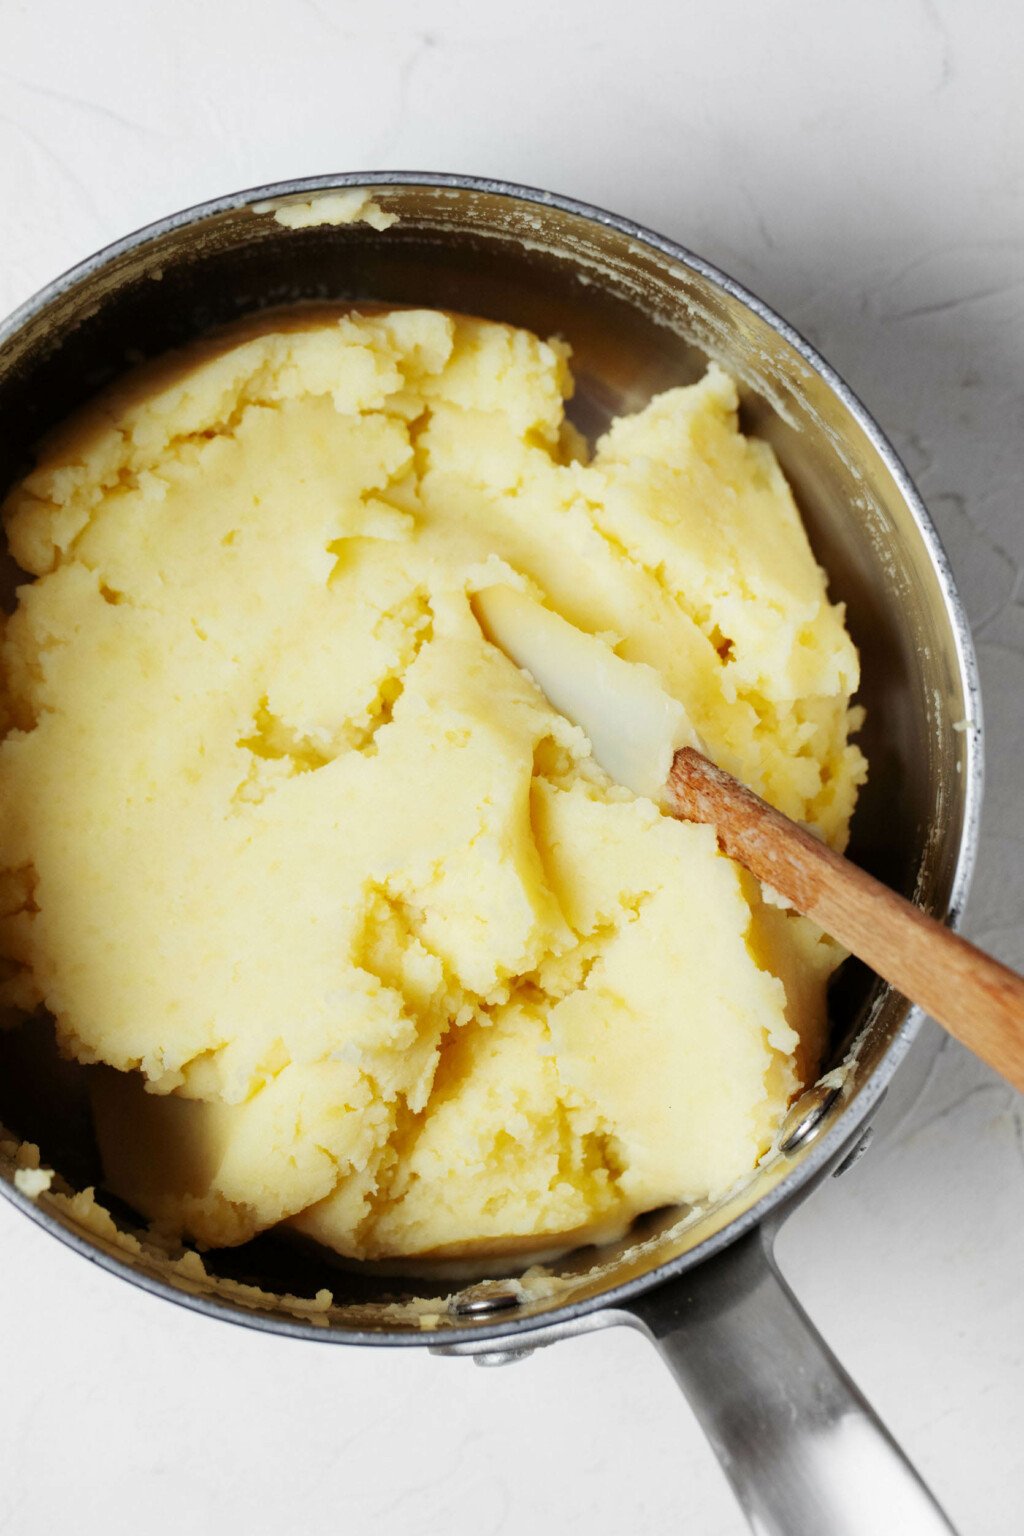 A silver pot is pictured from above. It contains mashed potatoes that are being mixed with a spatula.